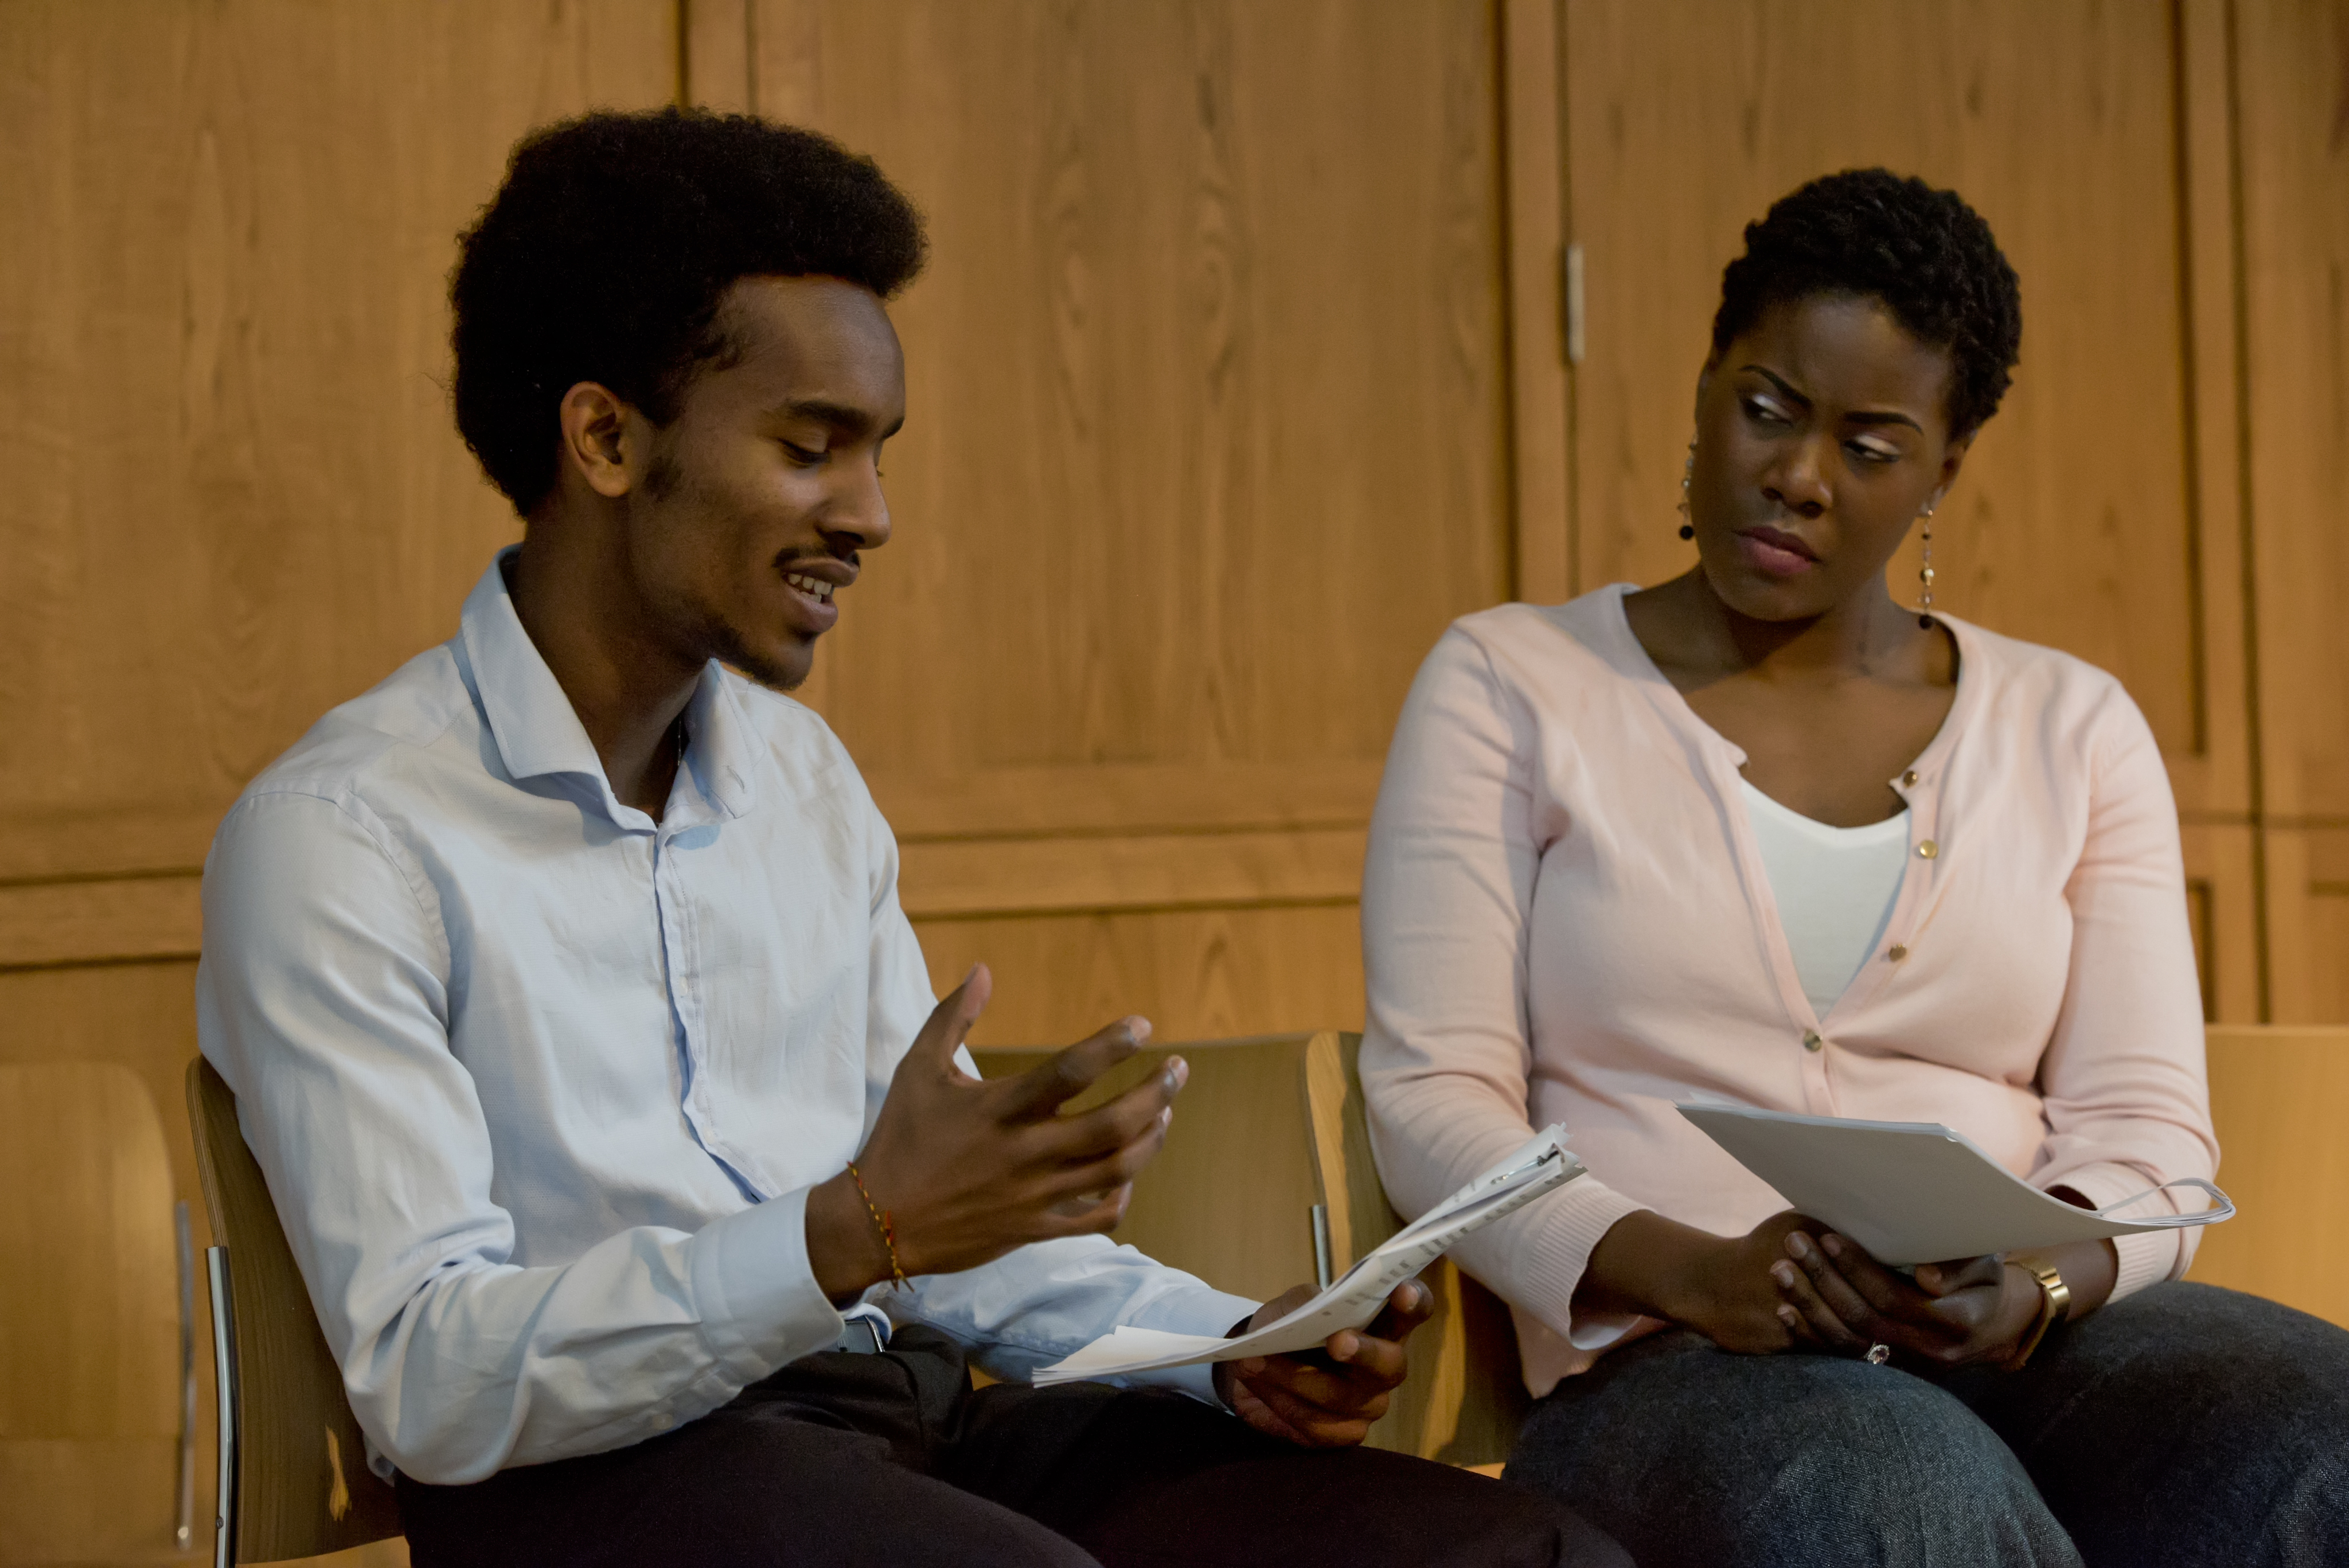 two people seated with one reading aloud from a script while the other listens intently